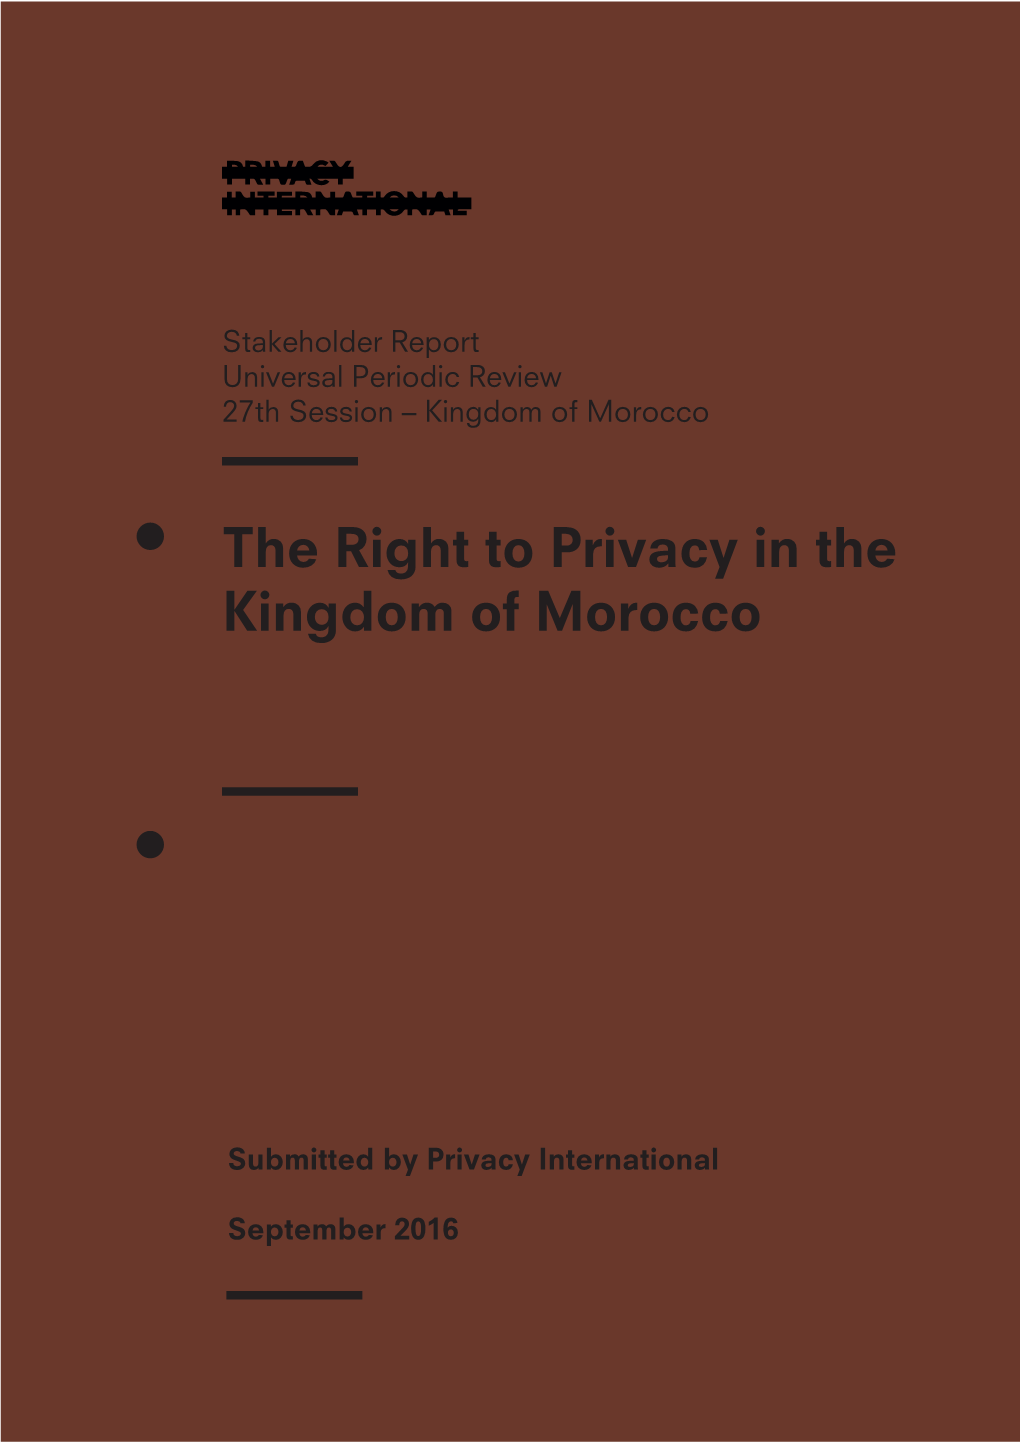 The Right to Privacy in the Kingdom of Morocco